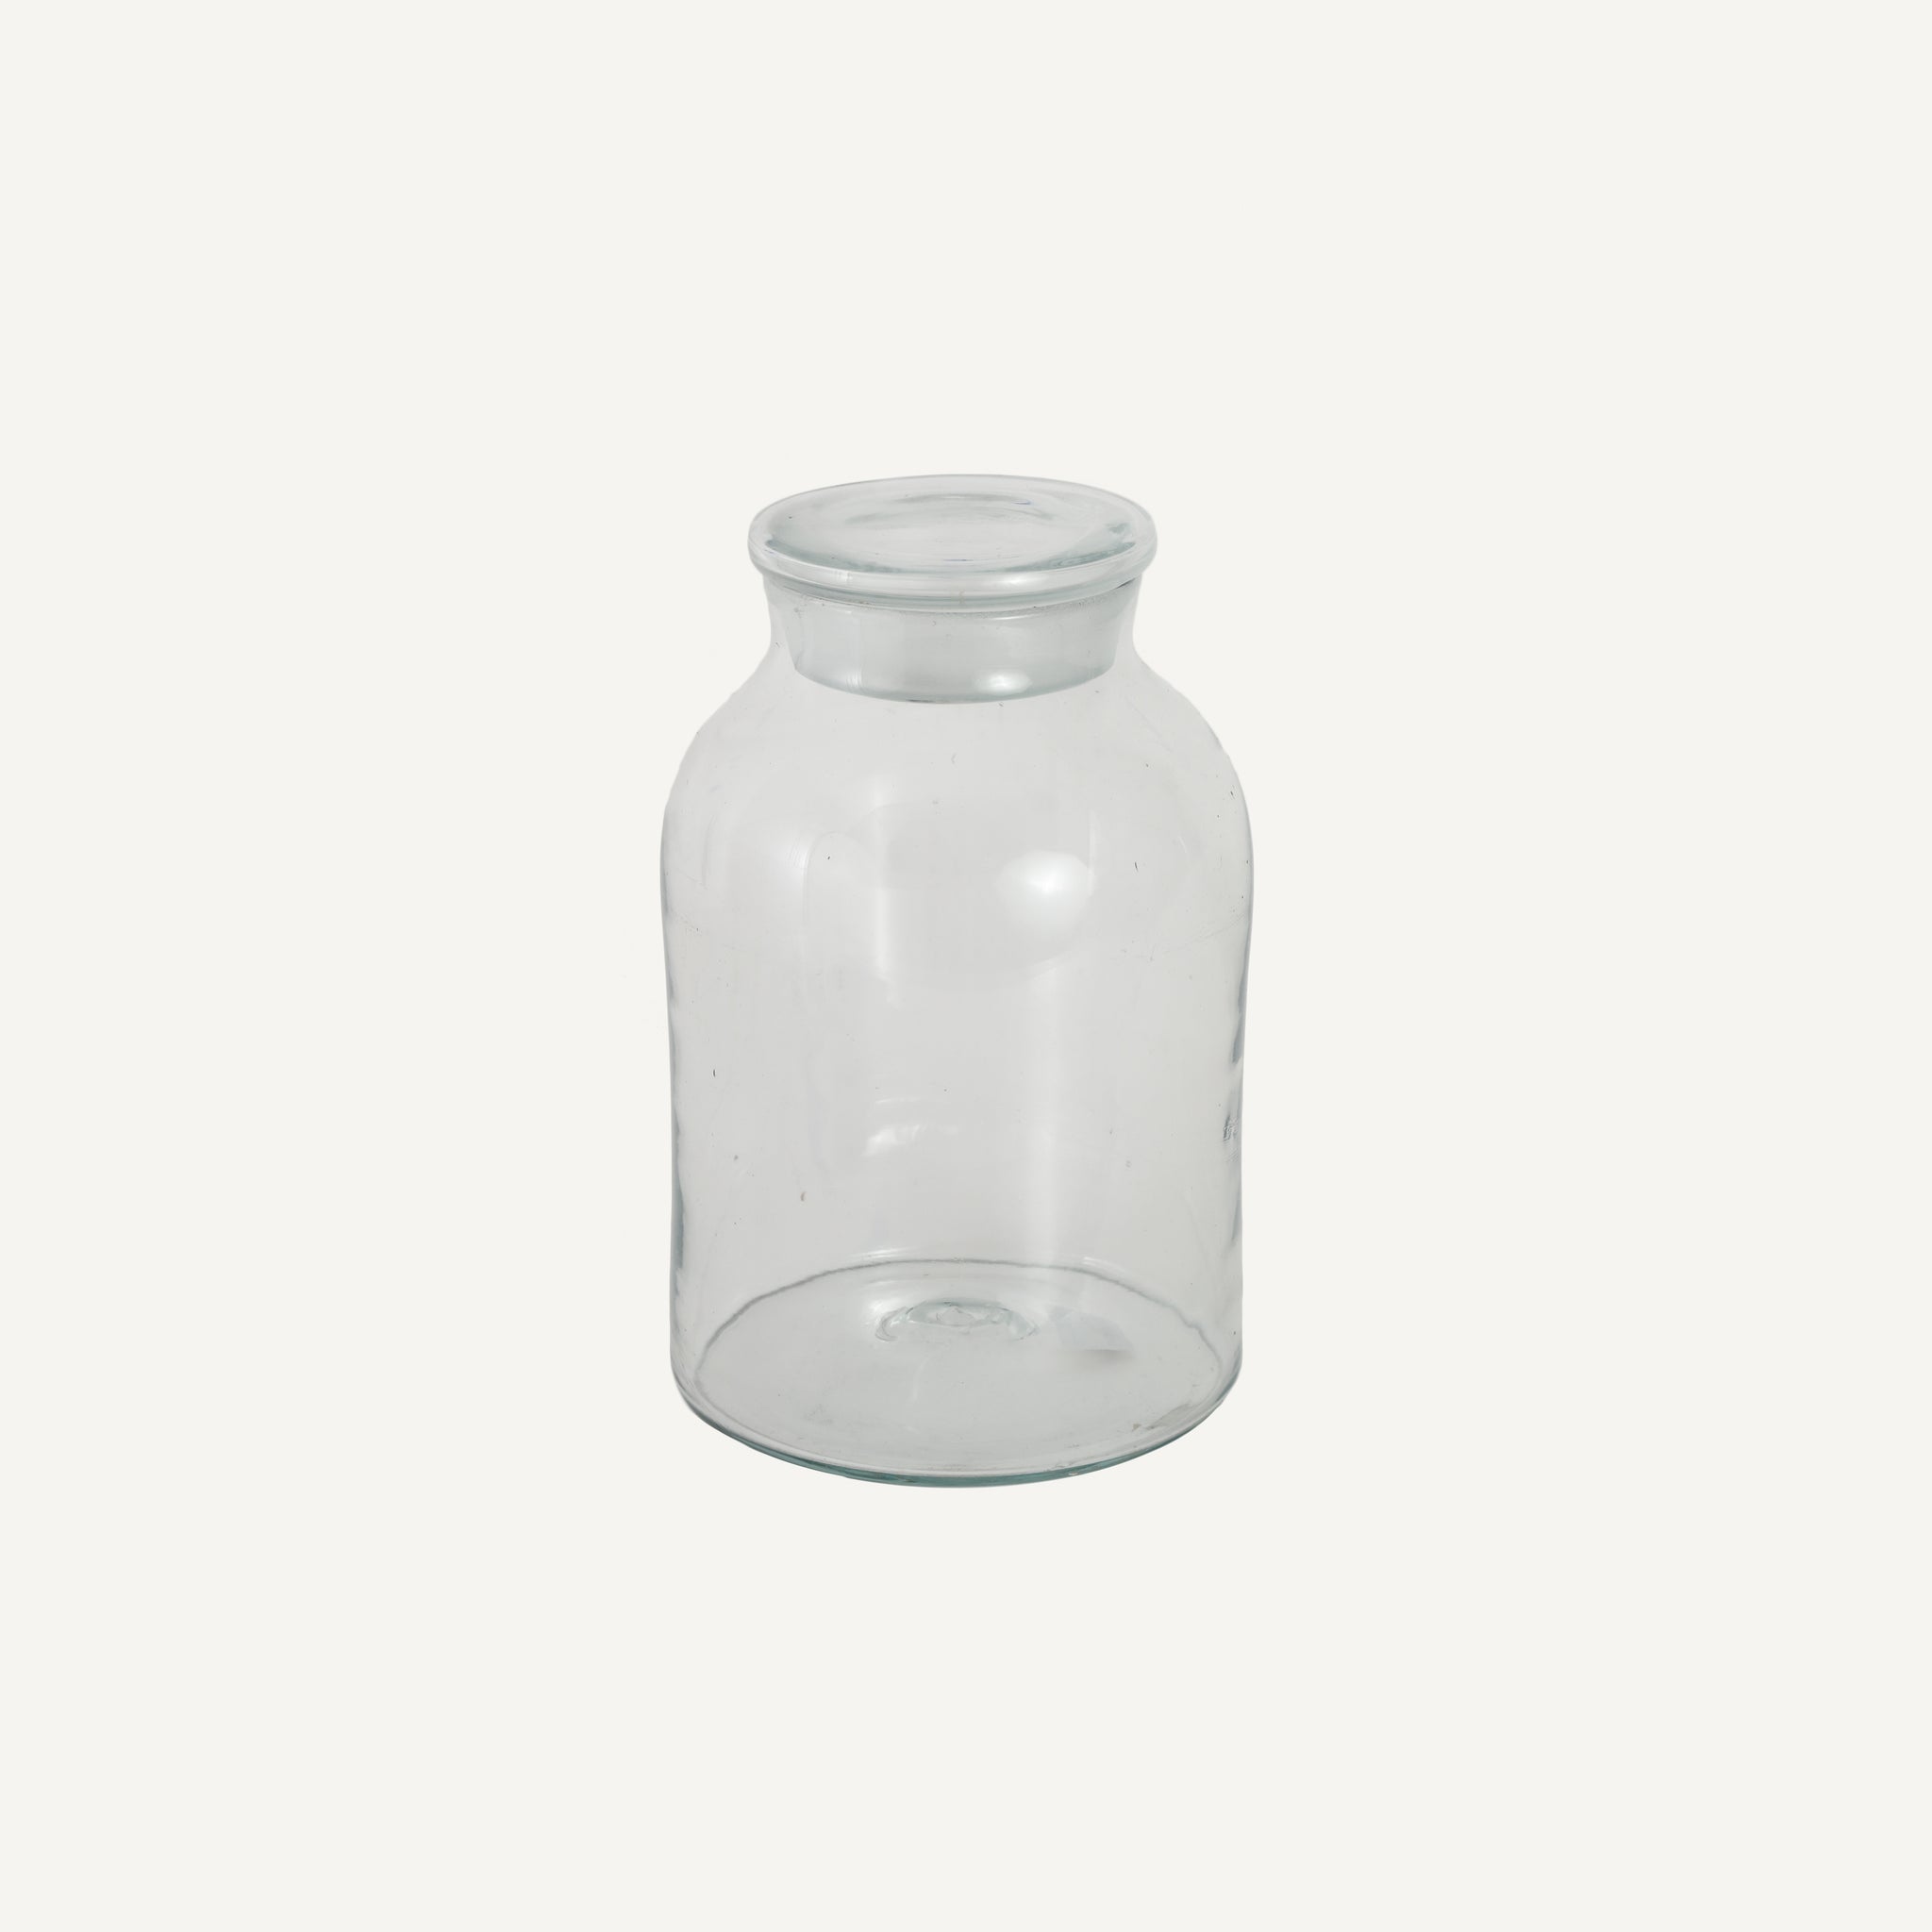 ANTIQUE GLASS JAR WITH GLASS LID